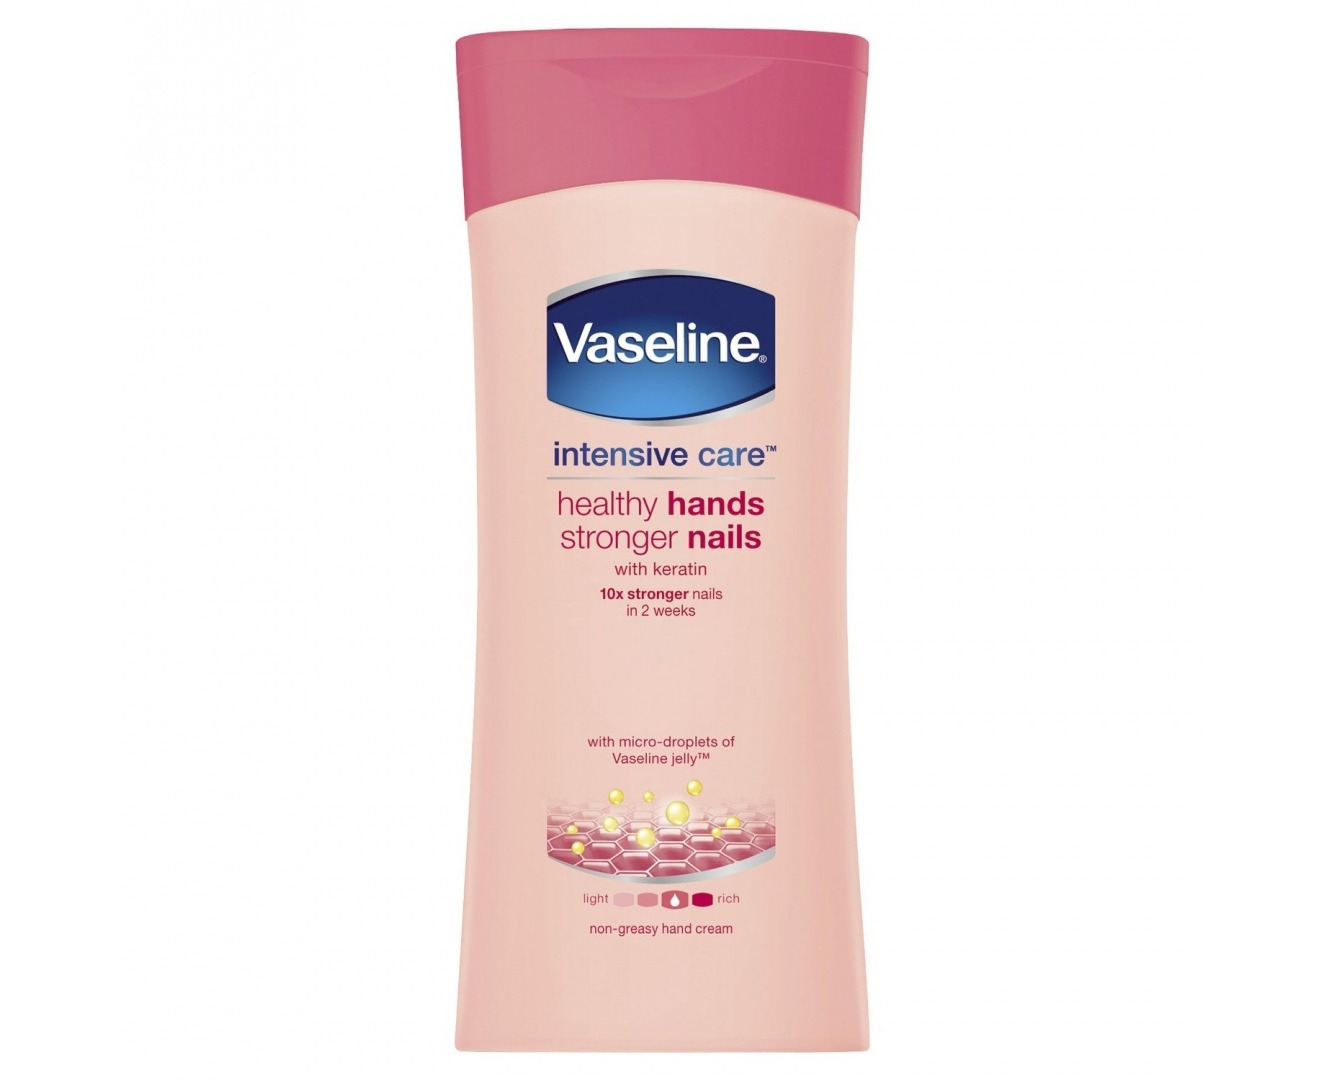 Vaseline Intensive Care Healthy Hands + Stronger Nails Lotion 200ml |  